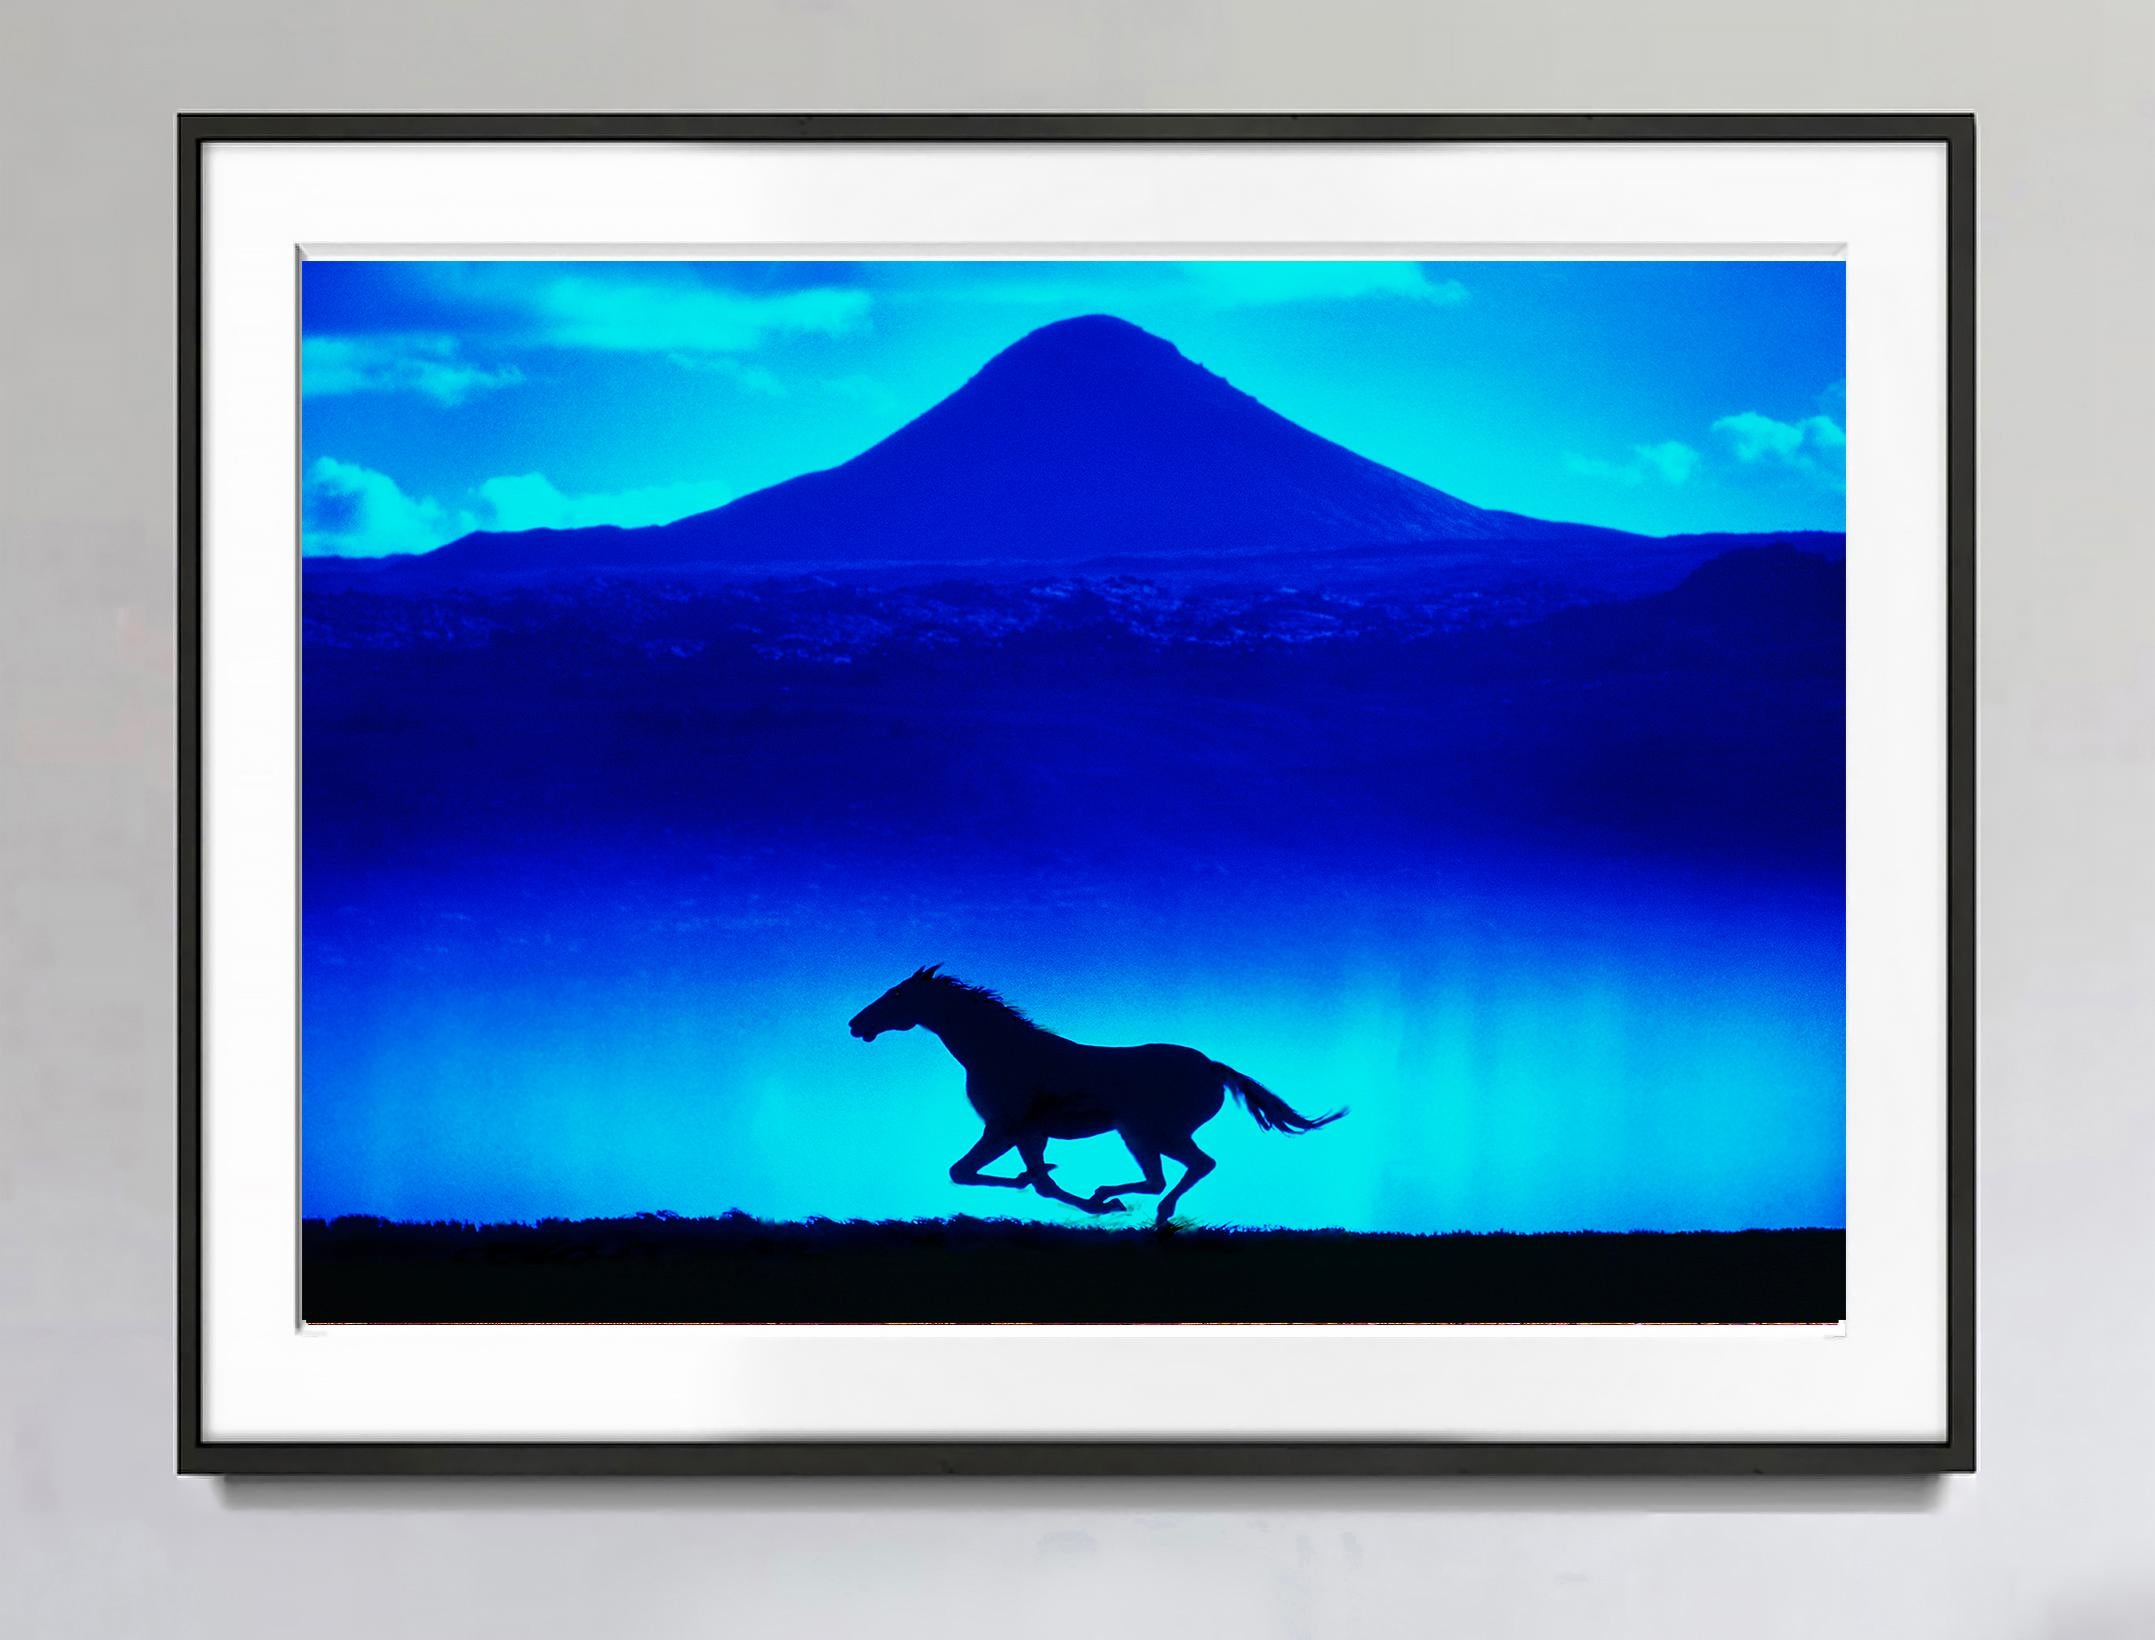 Solitary Running Horse Silhouetted against Blue Mountain - Photograph by Mitchell Funk